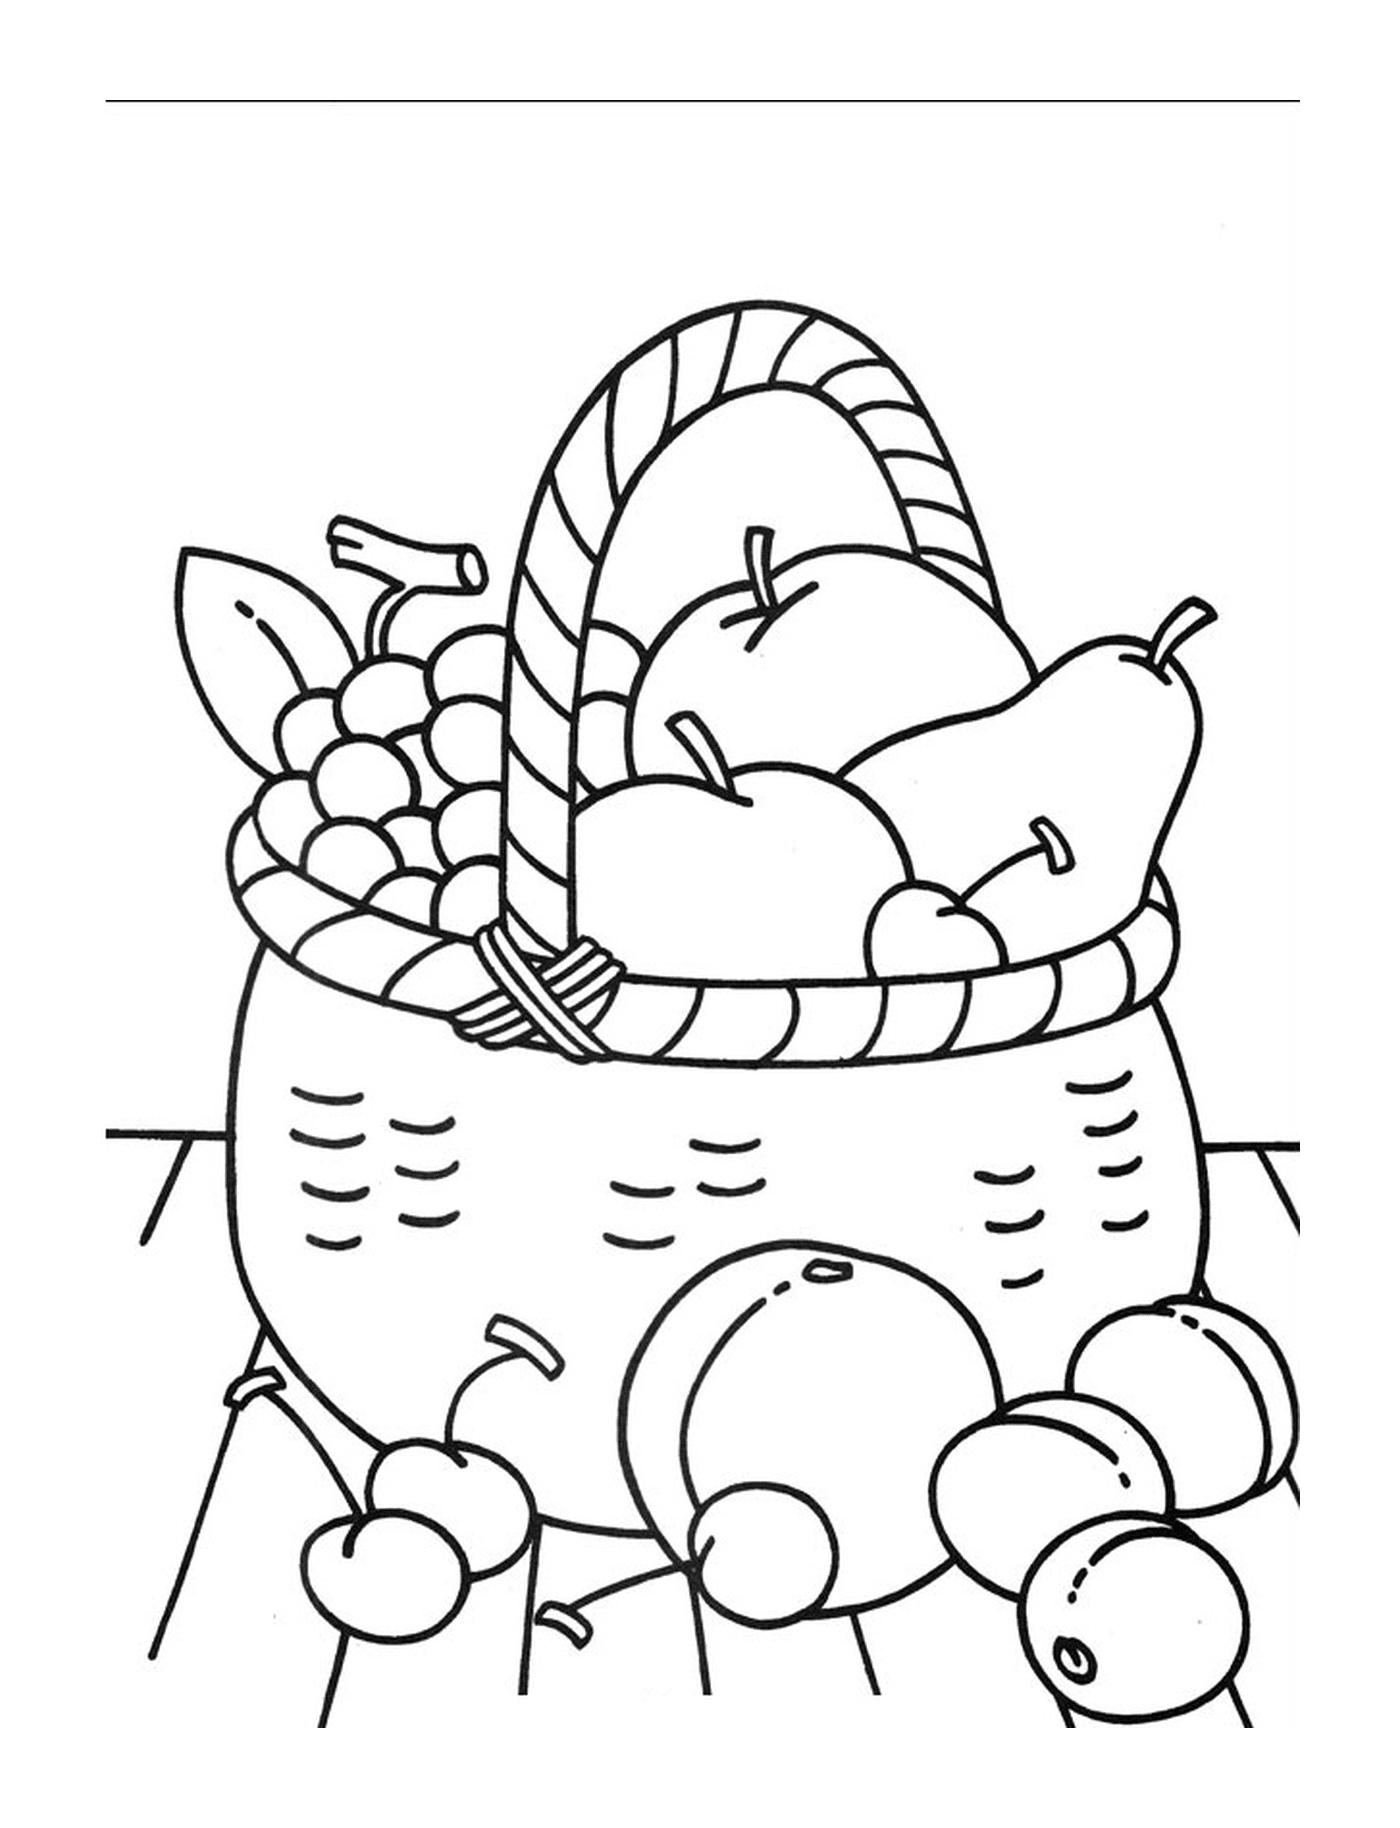  basket of apples and pears 